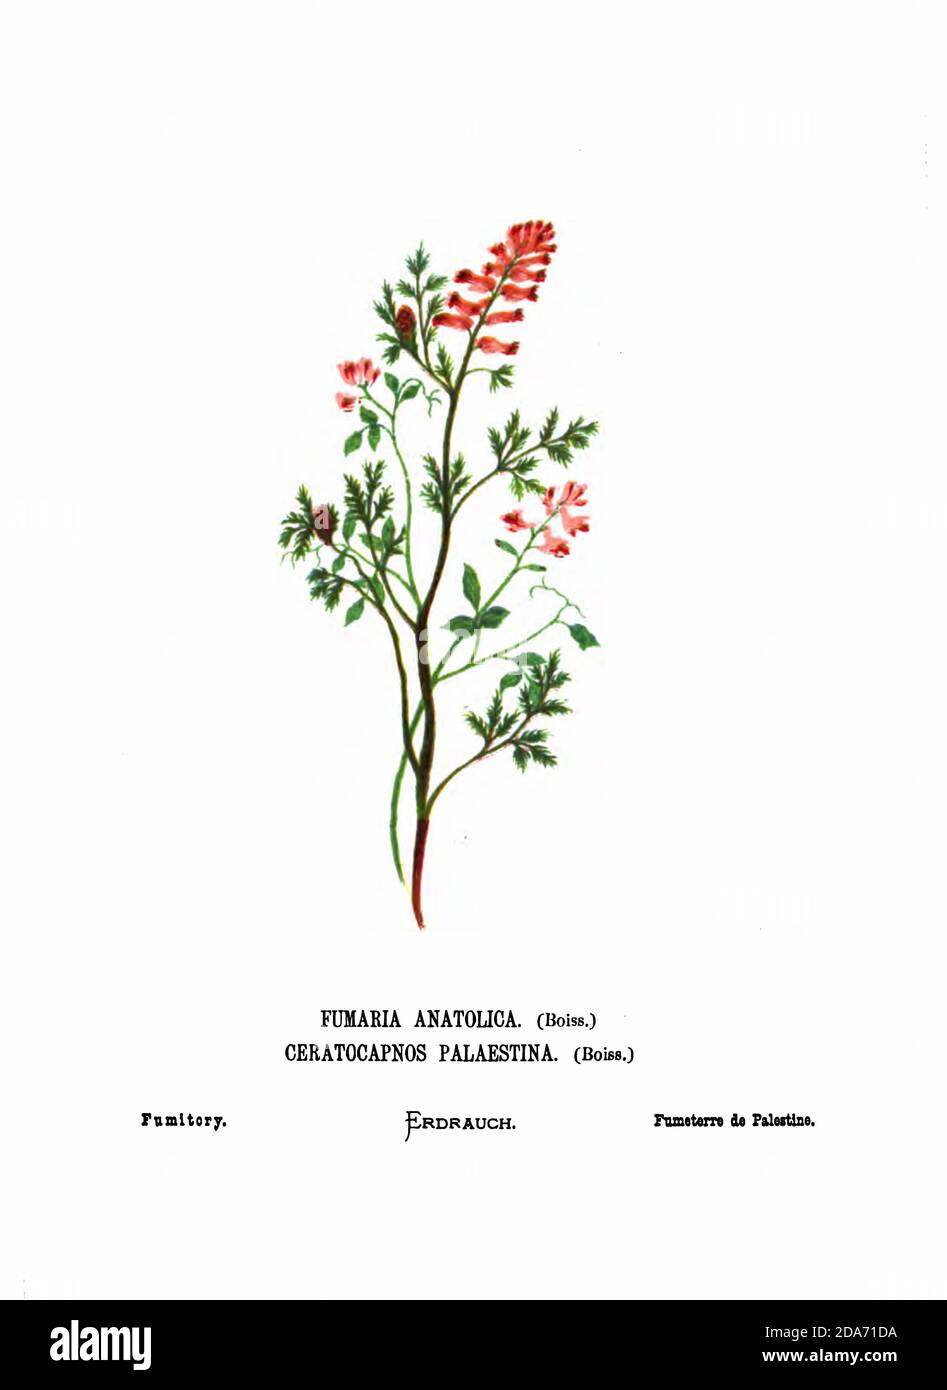 Fumitory (Fumaria anatolica syn Ceratocapnos palaestina) From the book Wild flowers of the Holy Land: Fifty-Four Plates Printed In Colours, Drawn And Painted After Nature. by Mrs. Hannah Zeller, (Gobat); Tristram, H. B. (Henry Baker), and Edward Atkinson, Published in London by James Nisbet & Co 1876 on white background Stock Photo